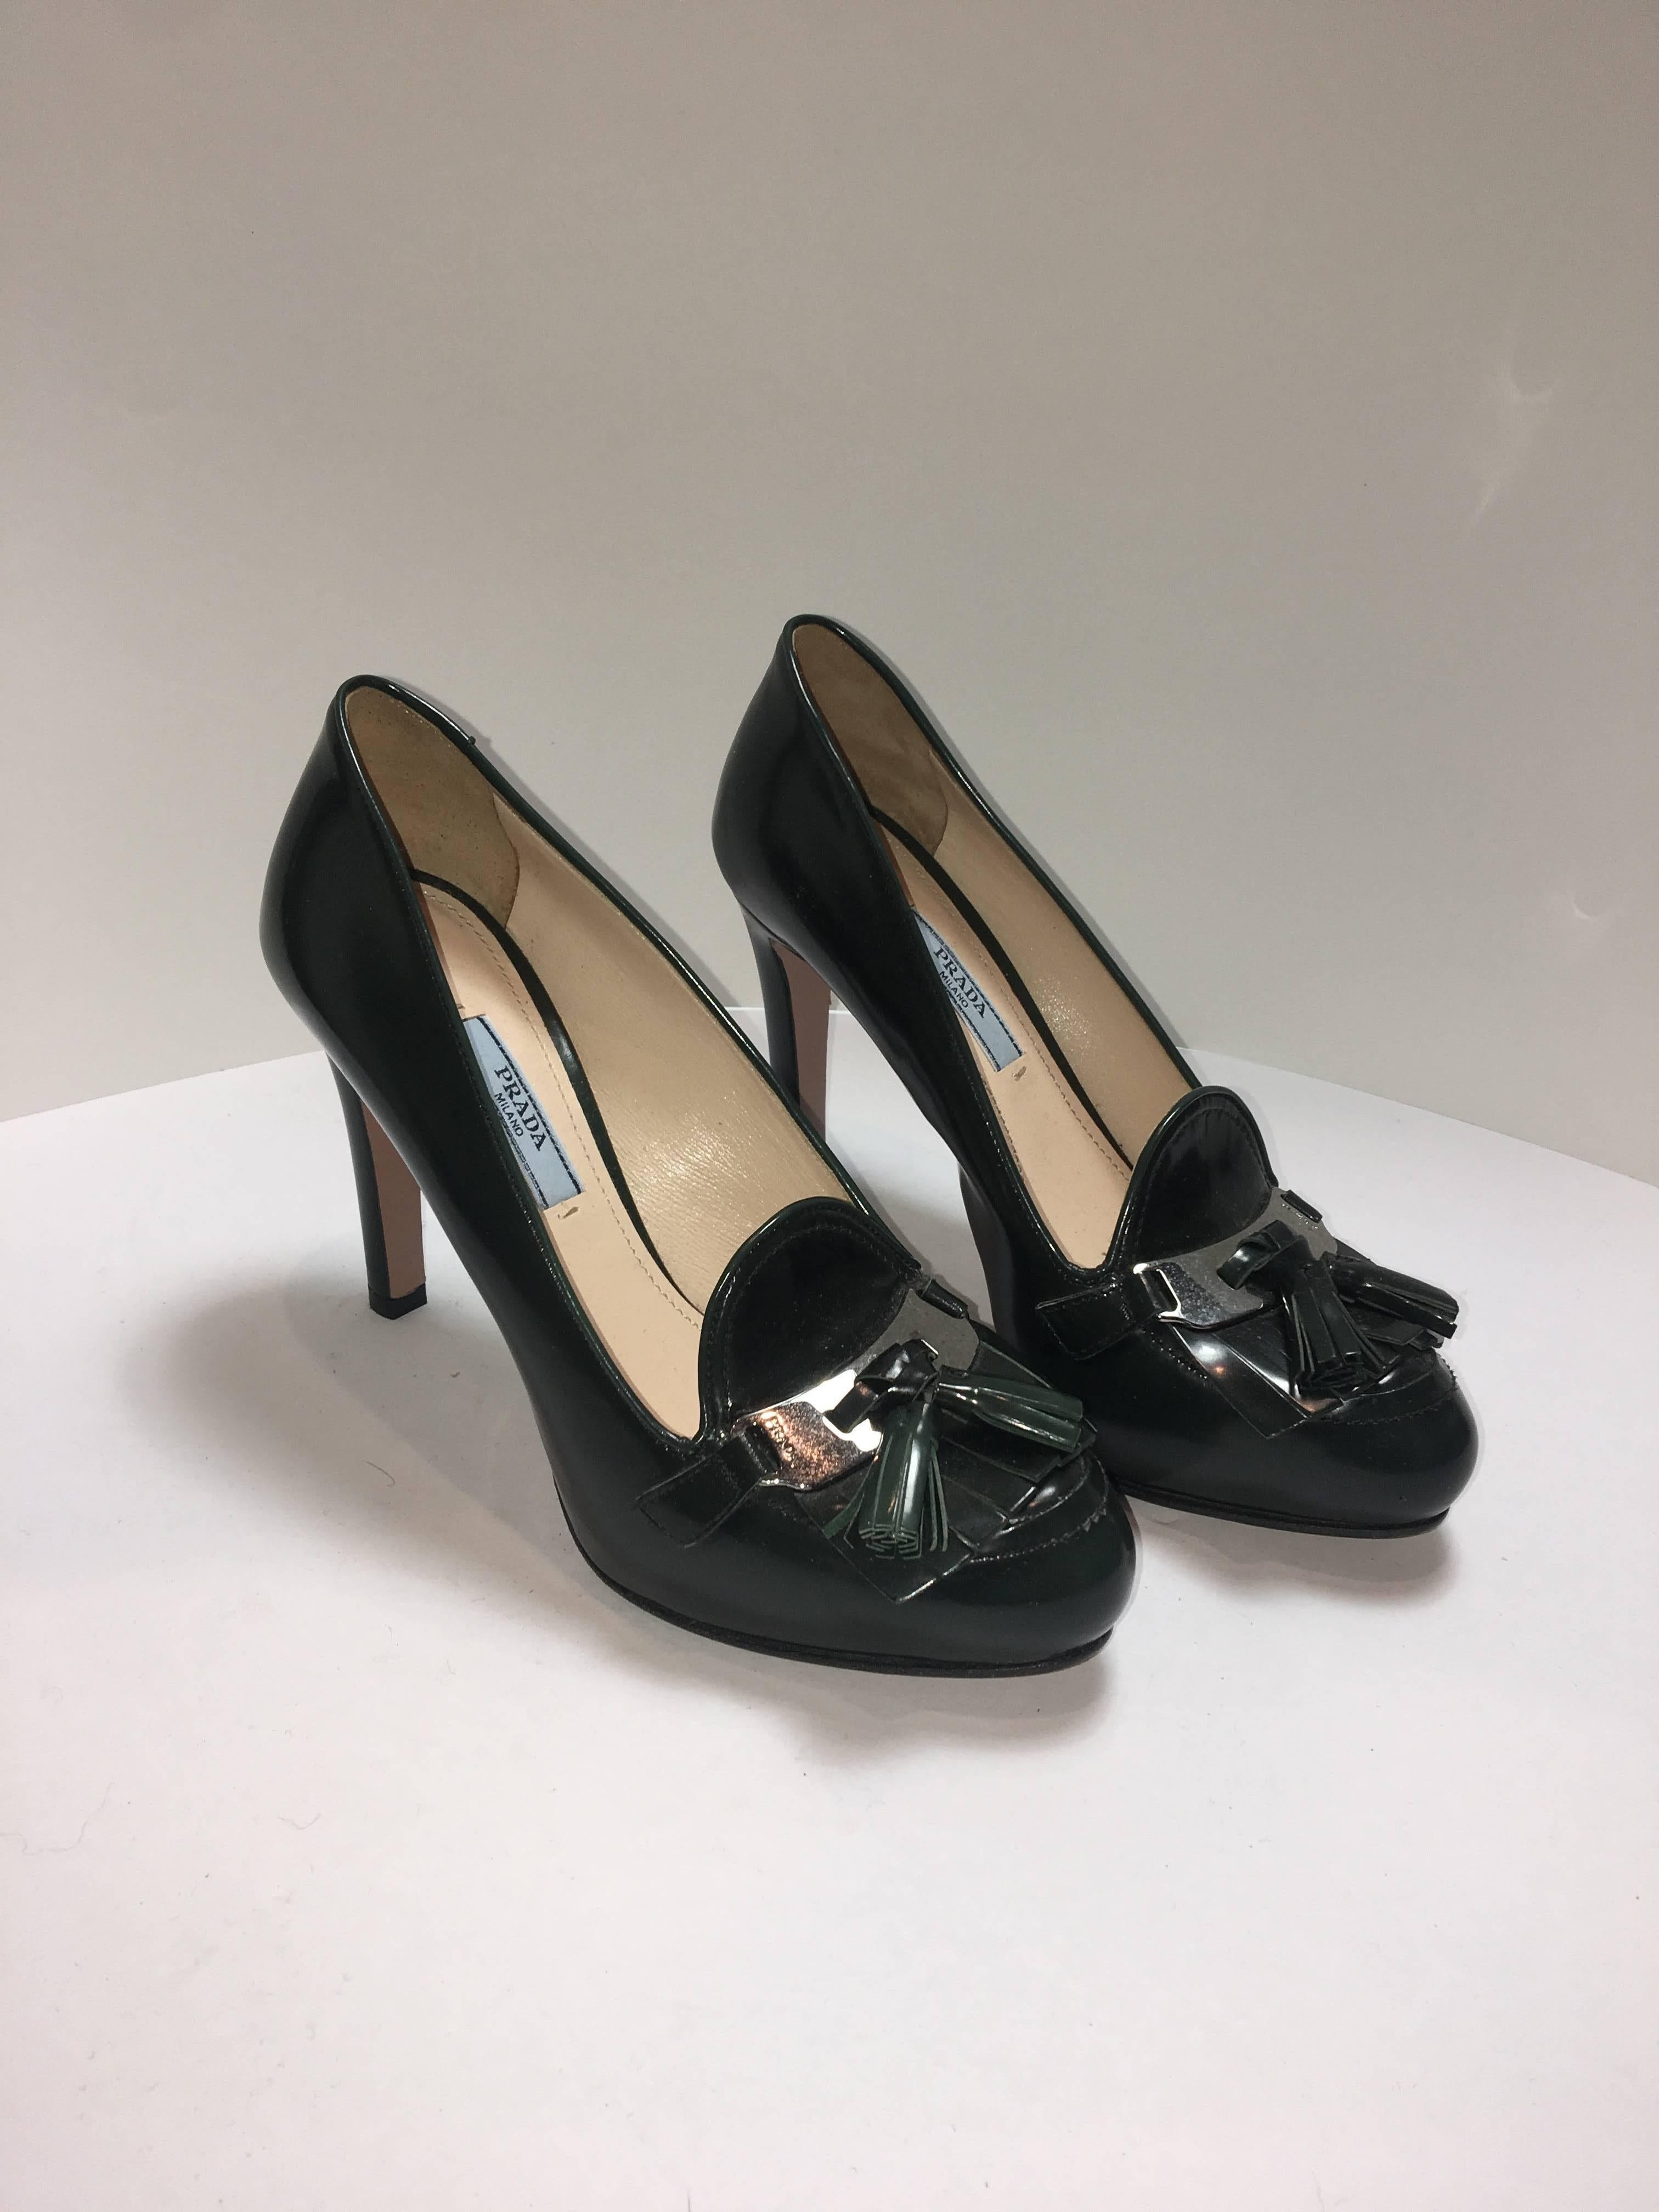 Prada Green Glazed Patent Leather with Tassel and Silver Toe Detail.